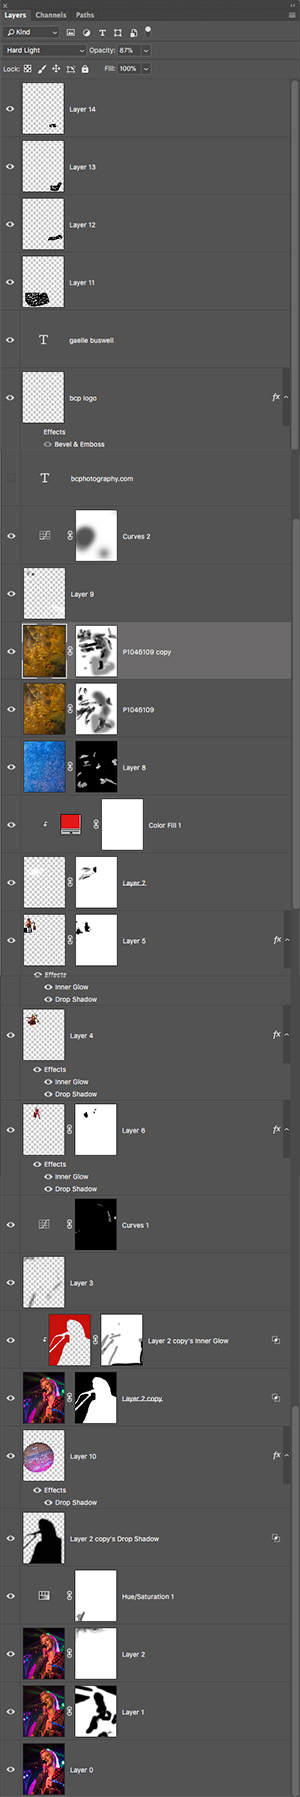 layers palette for image